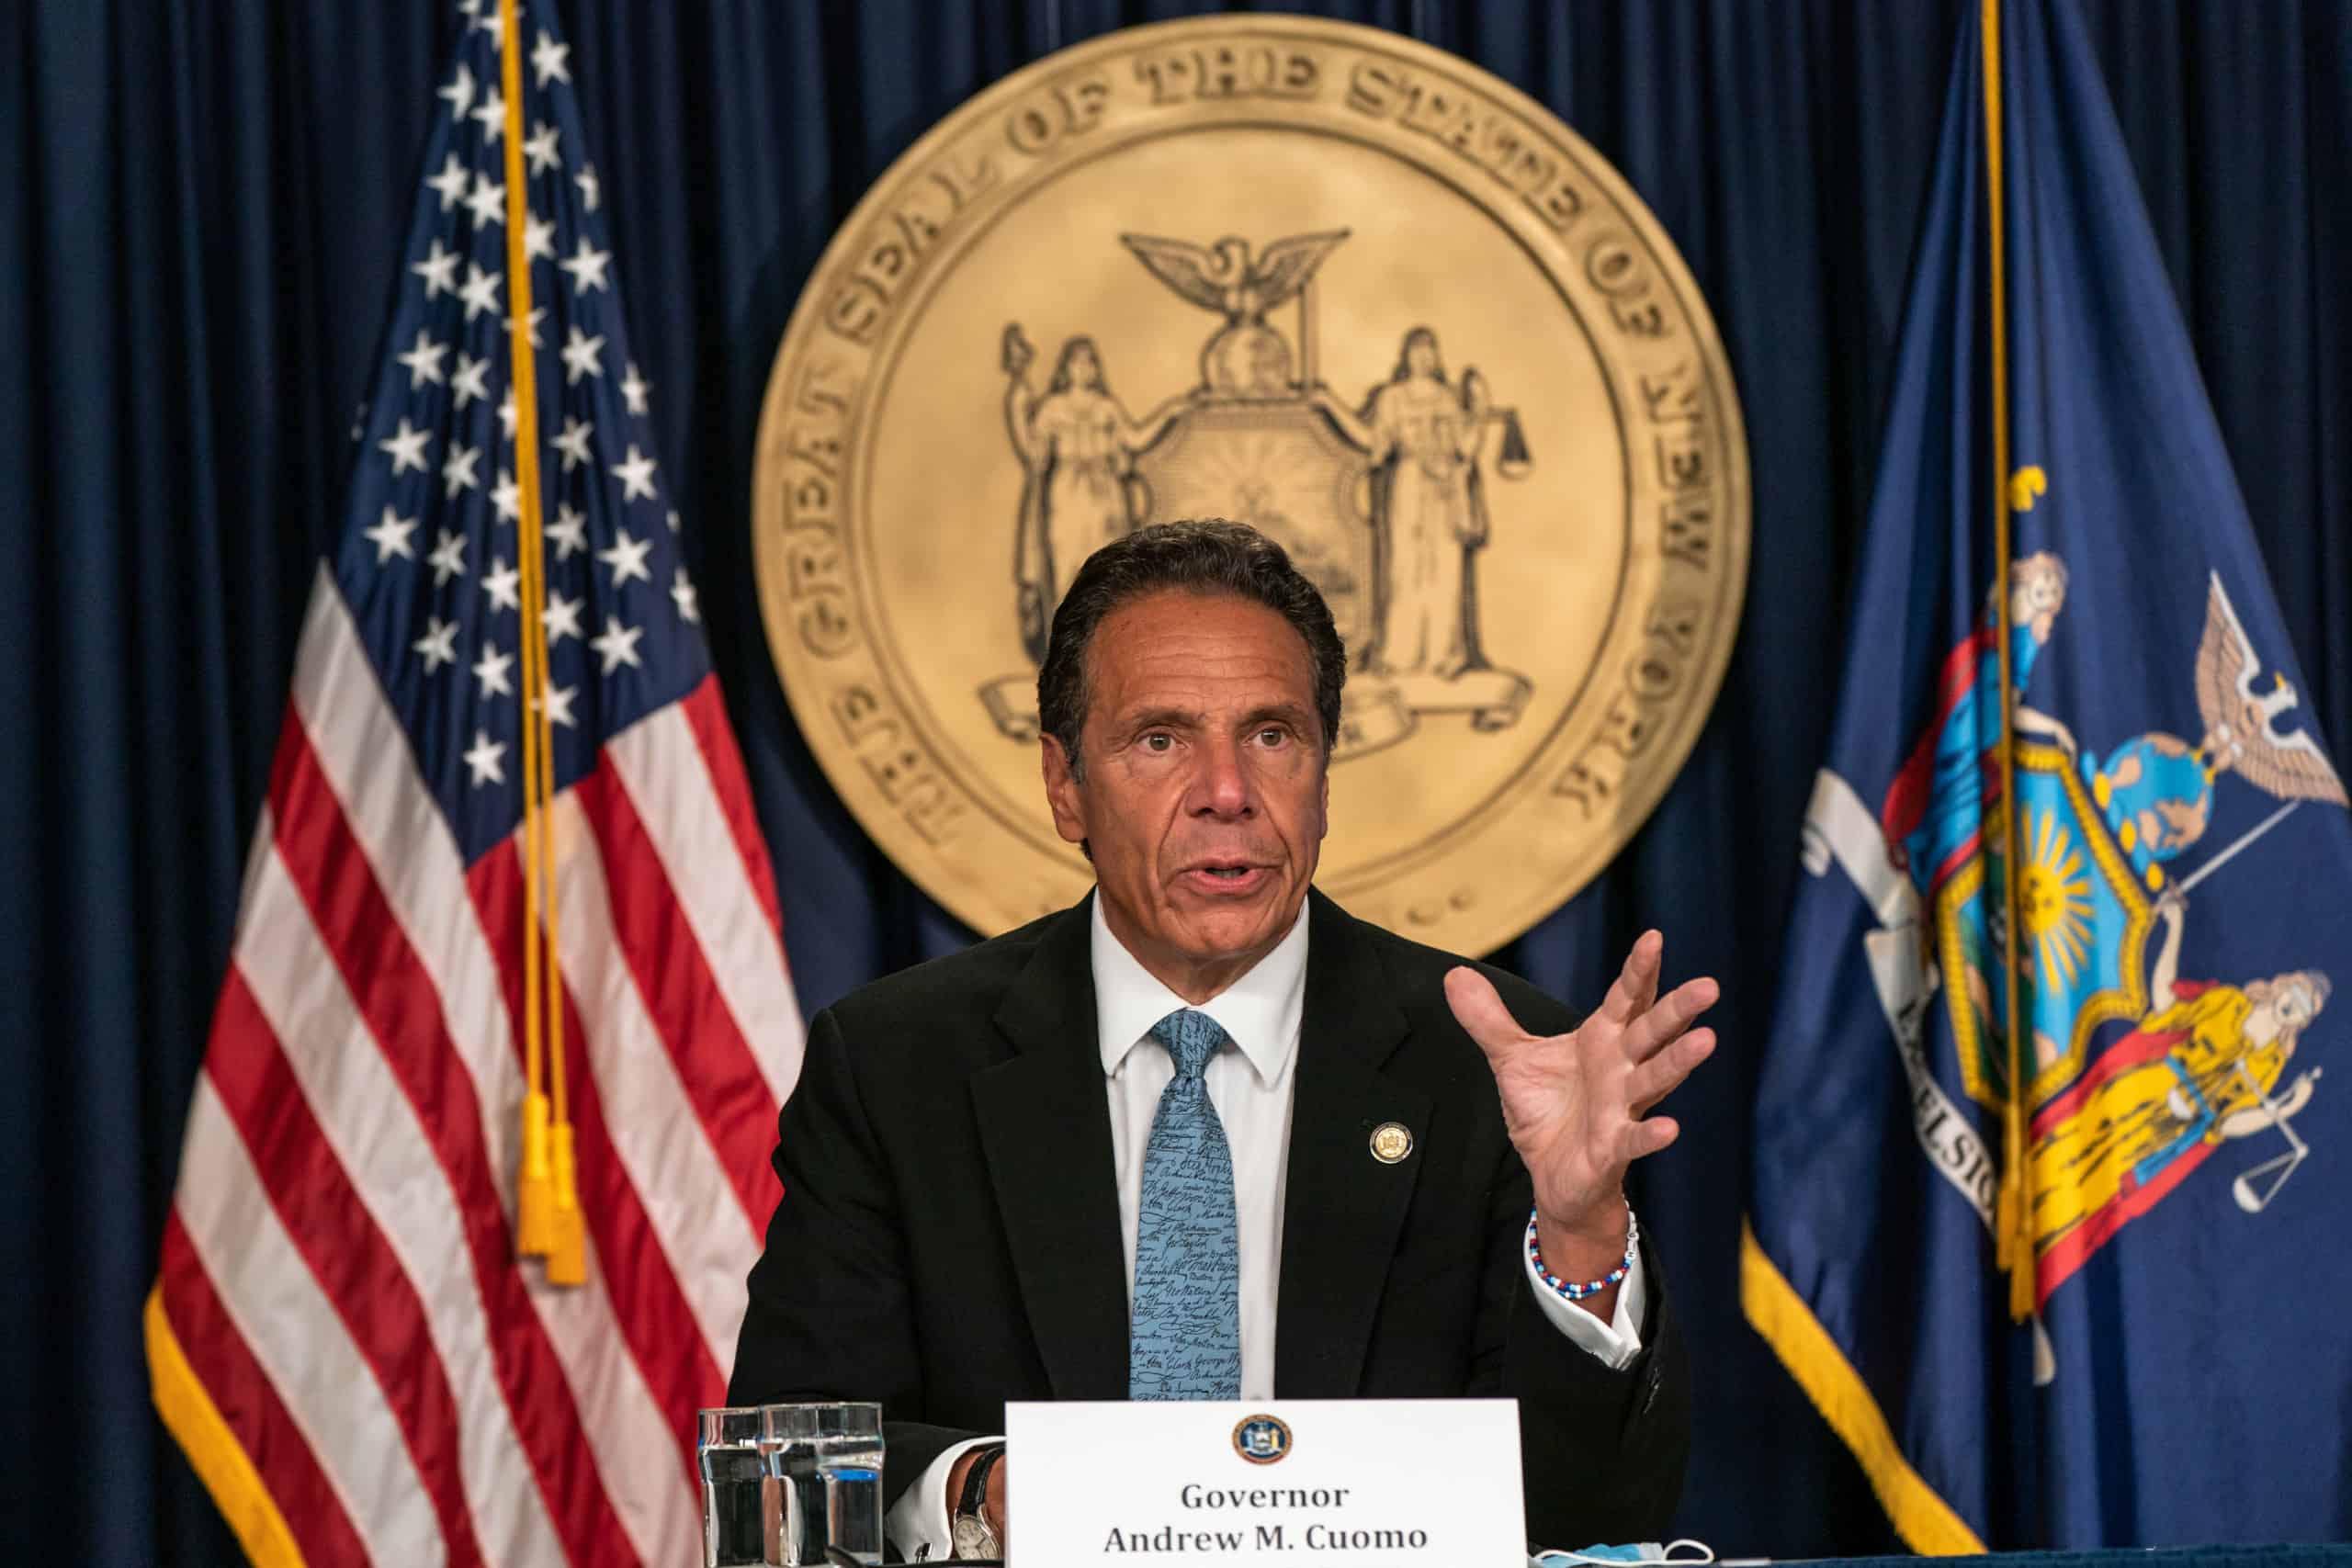 Governor Andrew Cuomo To Receive The International Emmy Founders Award For His Daily COVID-19 Briefings